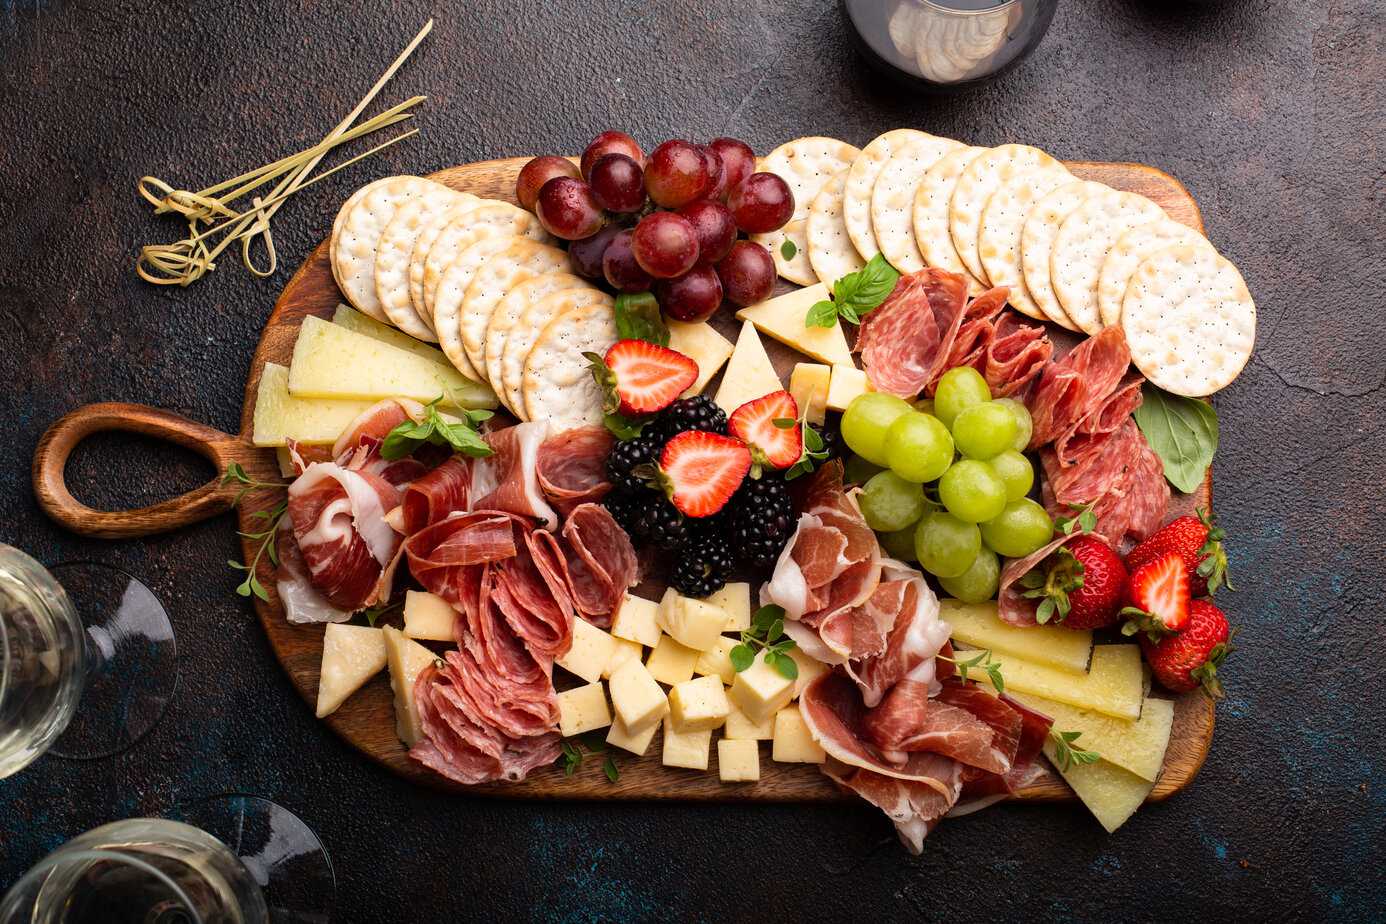 Charcuterie board filled with meats, cheeses and fruits with wine glasses next to it on a black counter